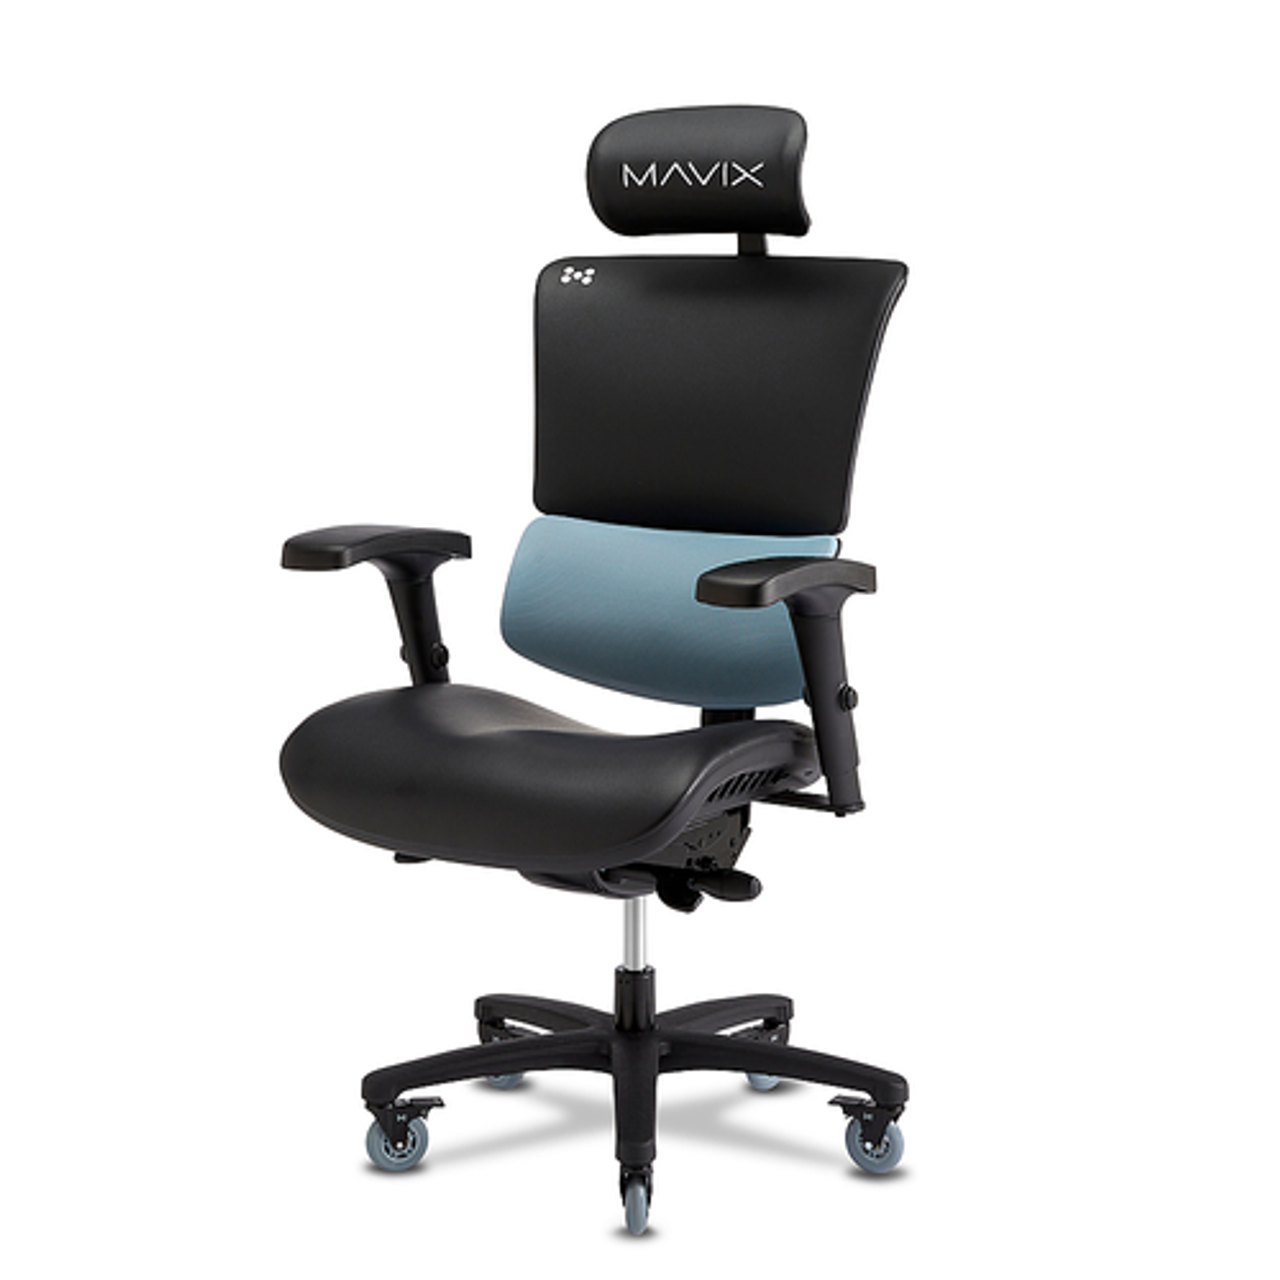 X-Chair - M9 Wide Seat M-Foam Gaming Chair with Headrest - Black/Glacier